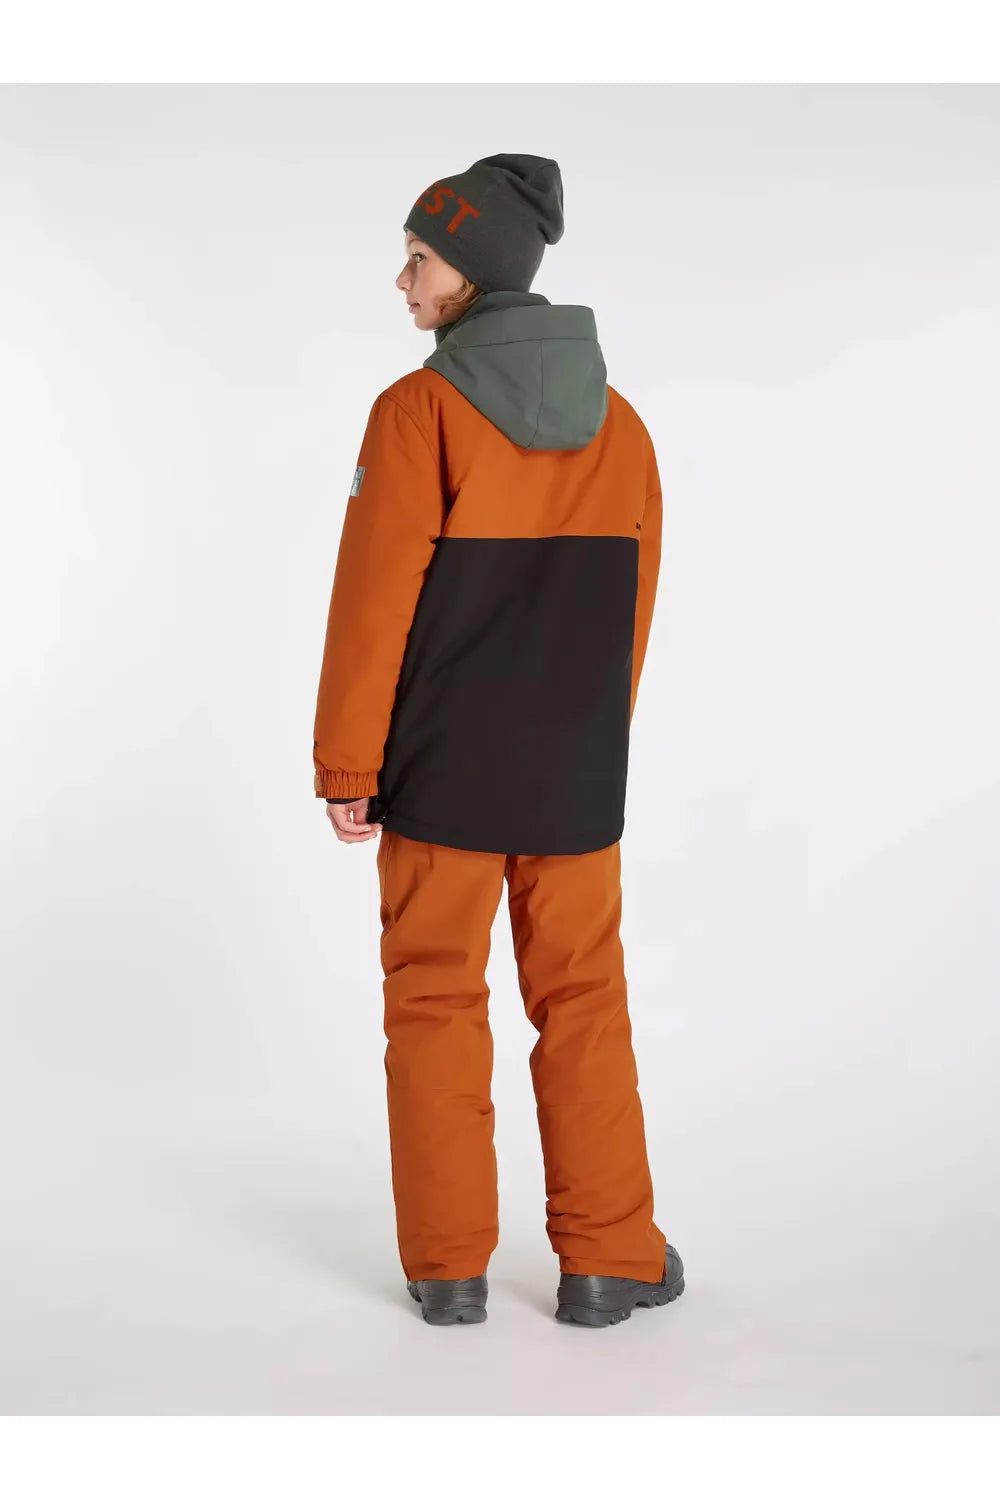 Protest Isaact Jr Anorak